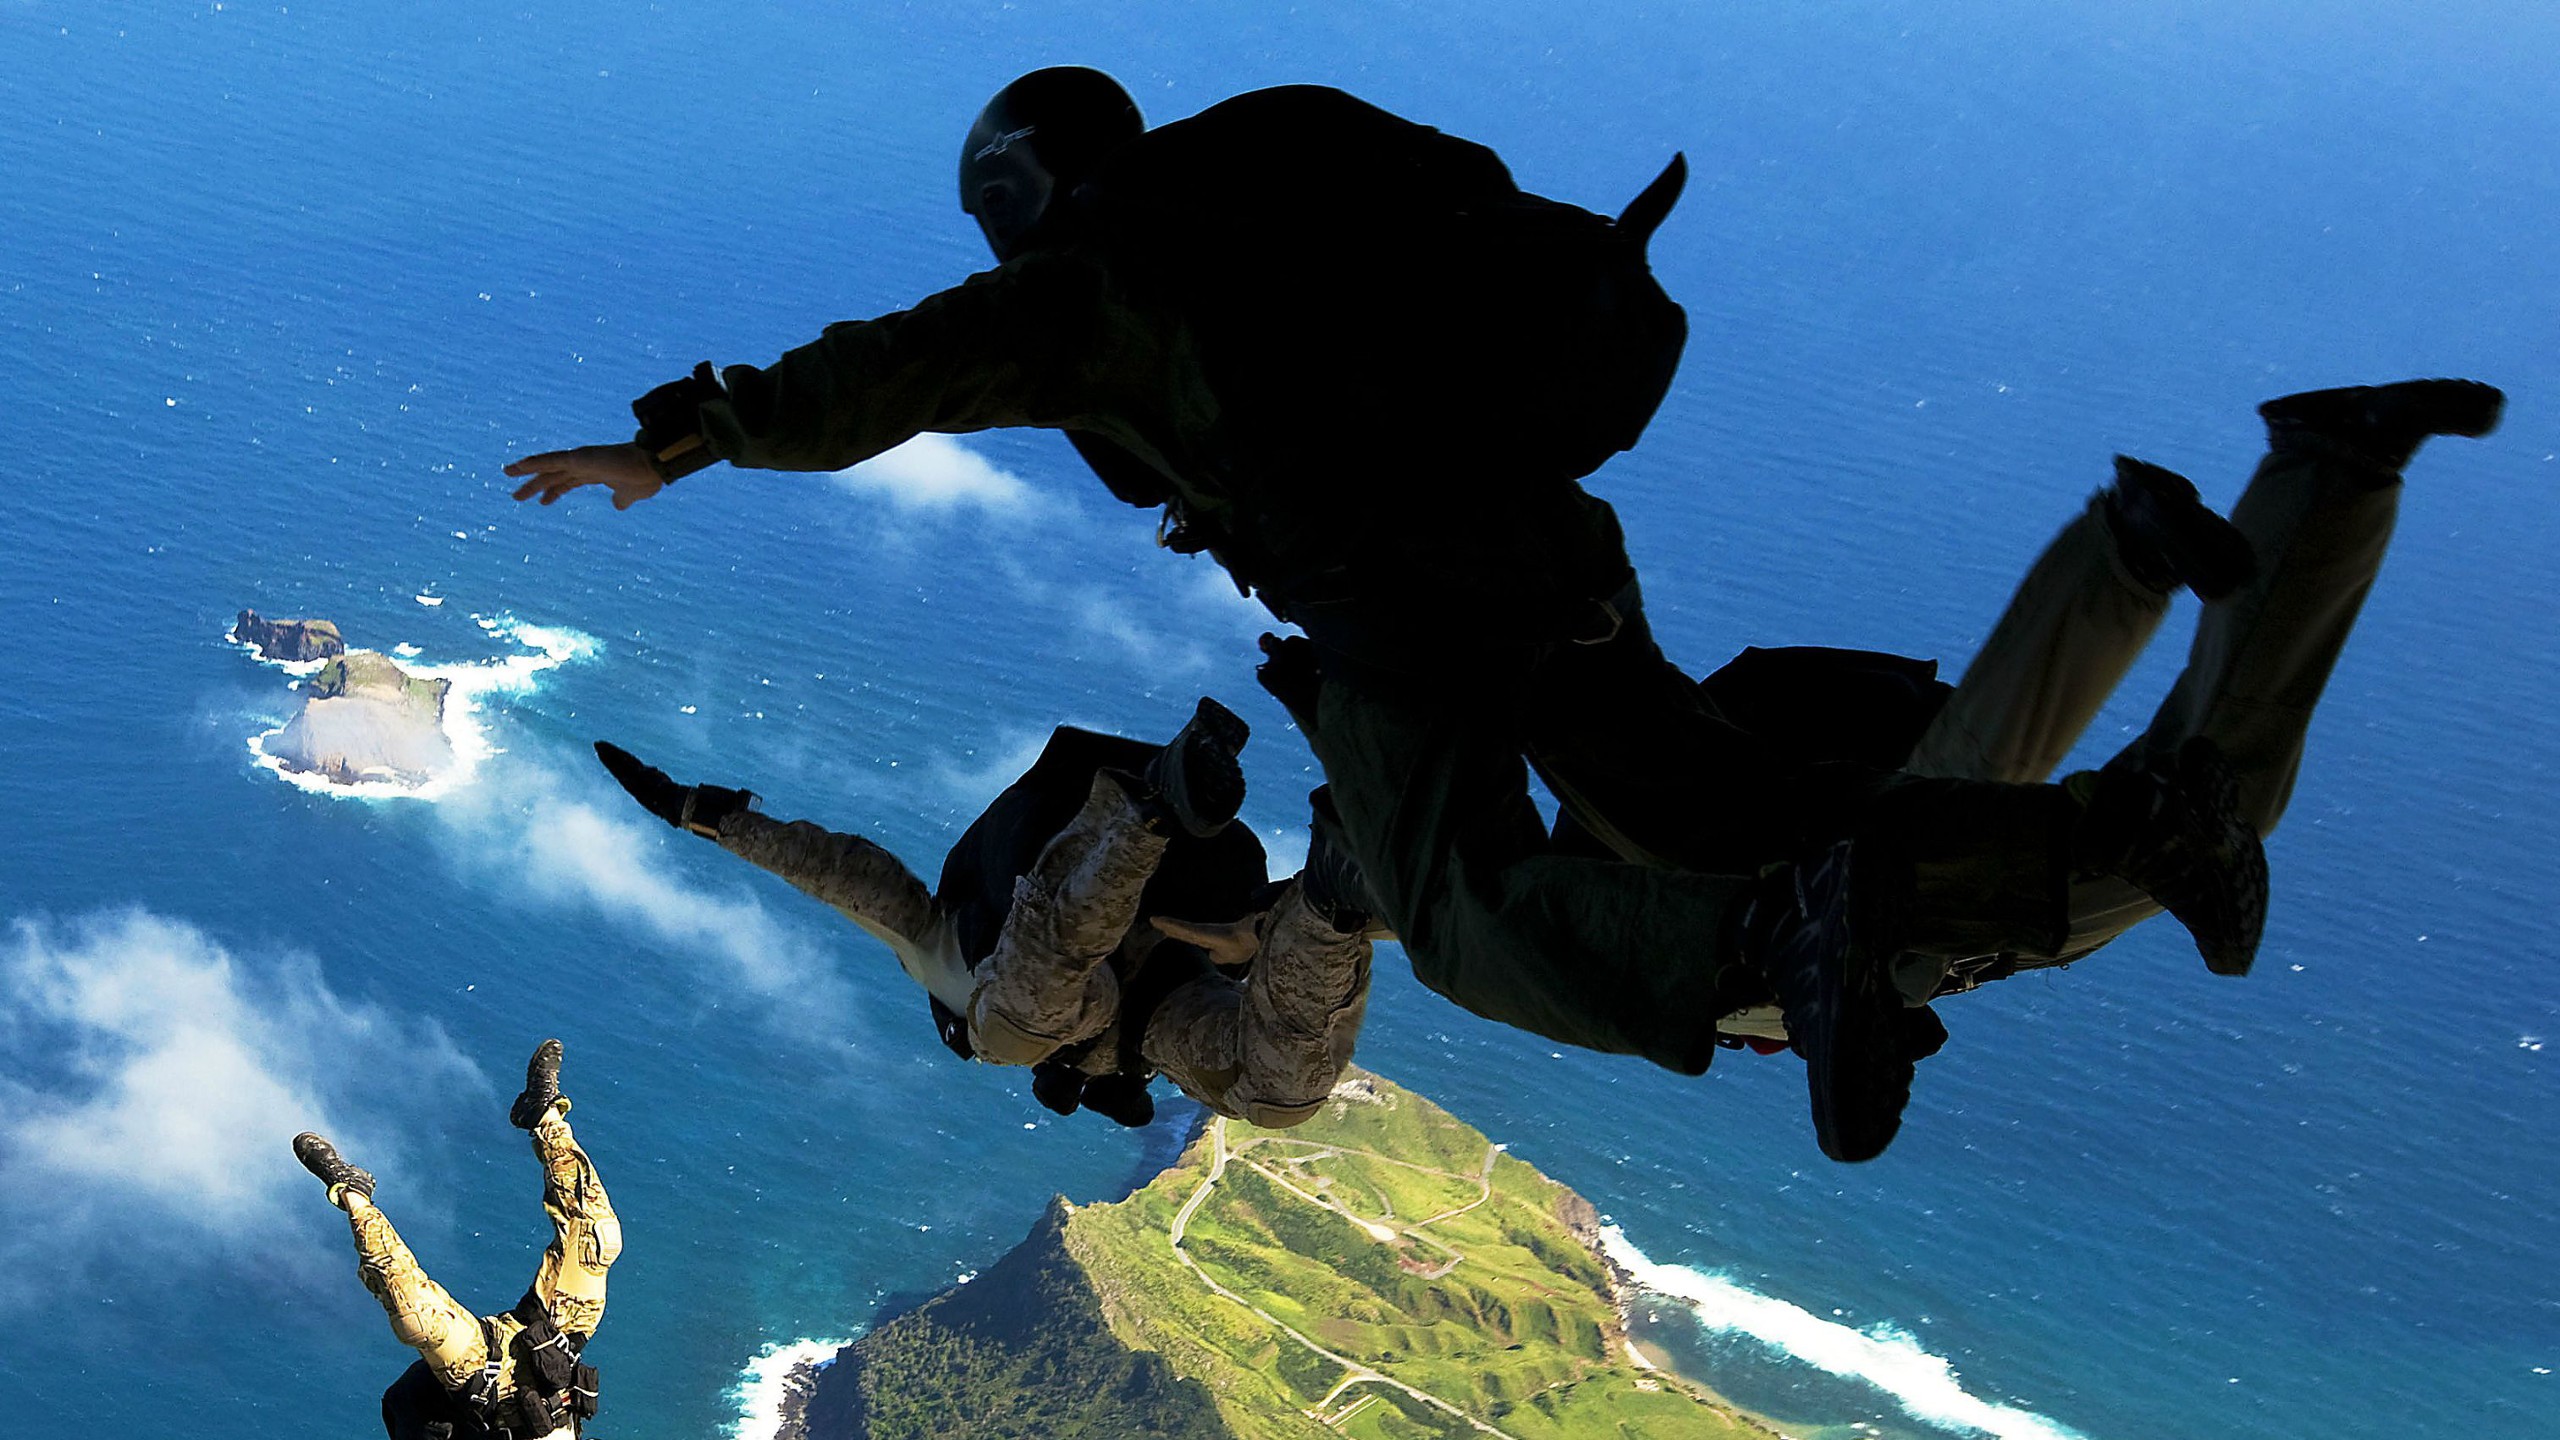 General 2560x1440 military paratroopers Hawaii United States Army soldier